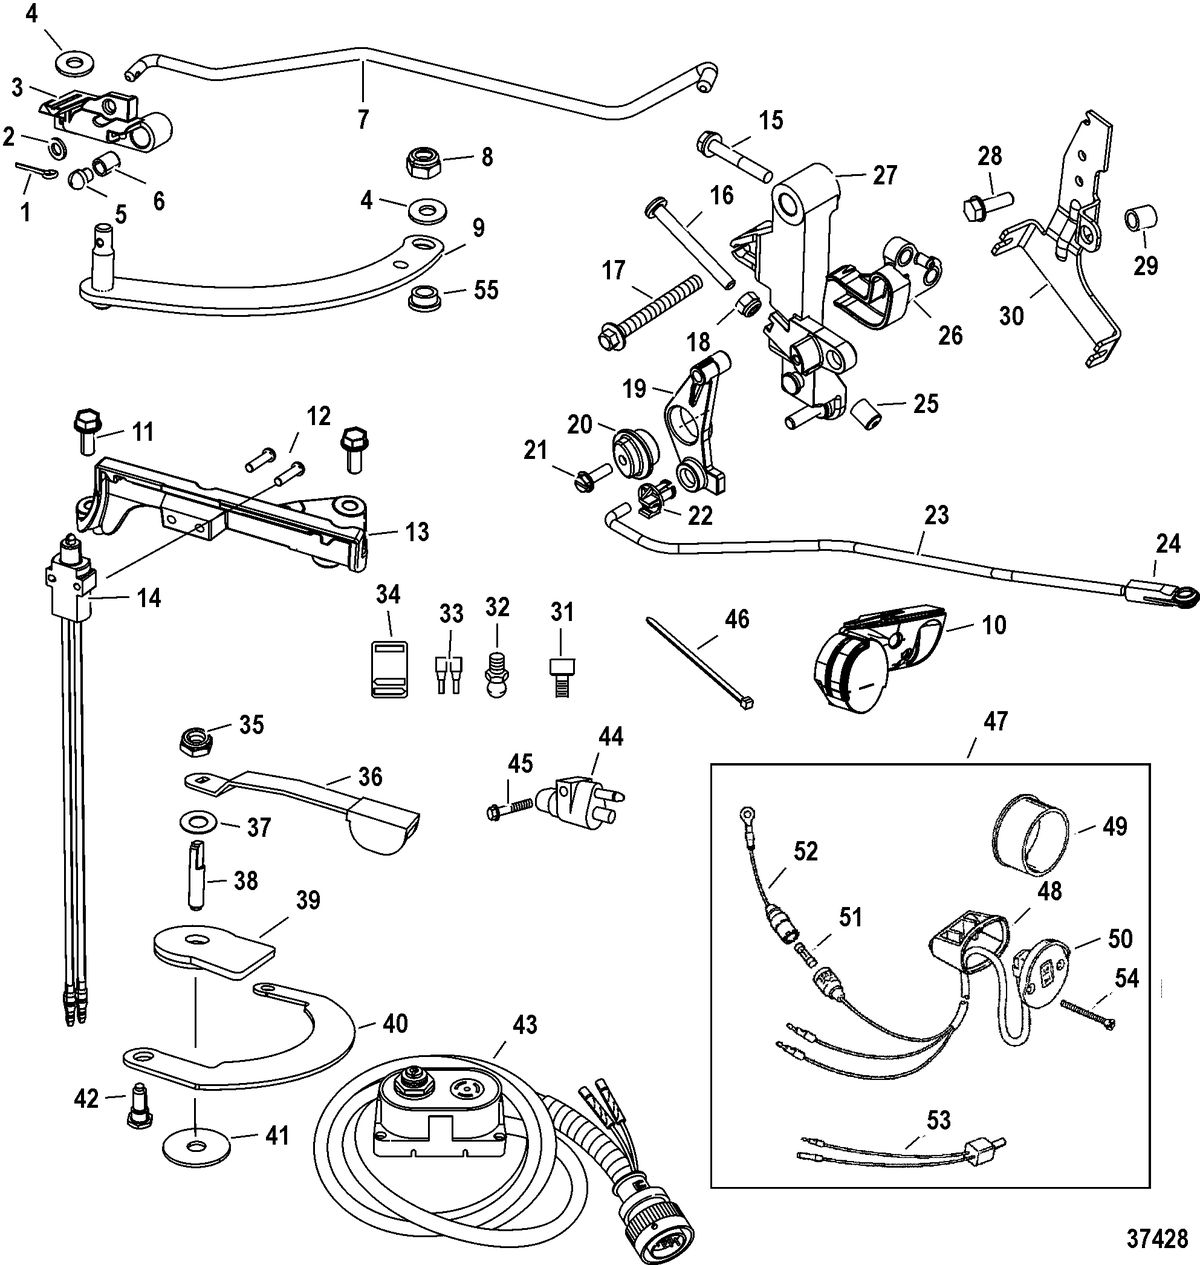 ACCESSORIES STEERING SYSTEMS AND COMPONENTS Tiller Handle Kit Components(880093A03)